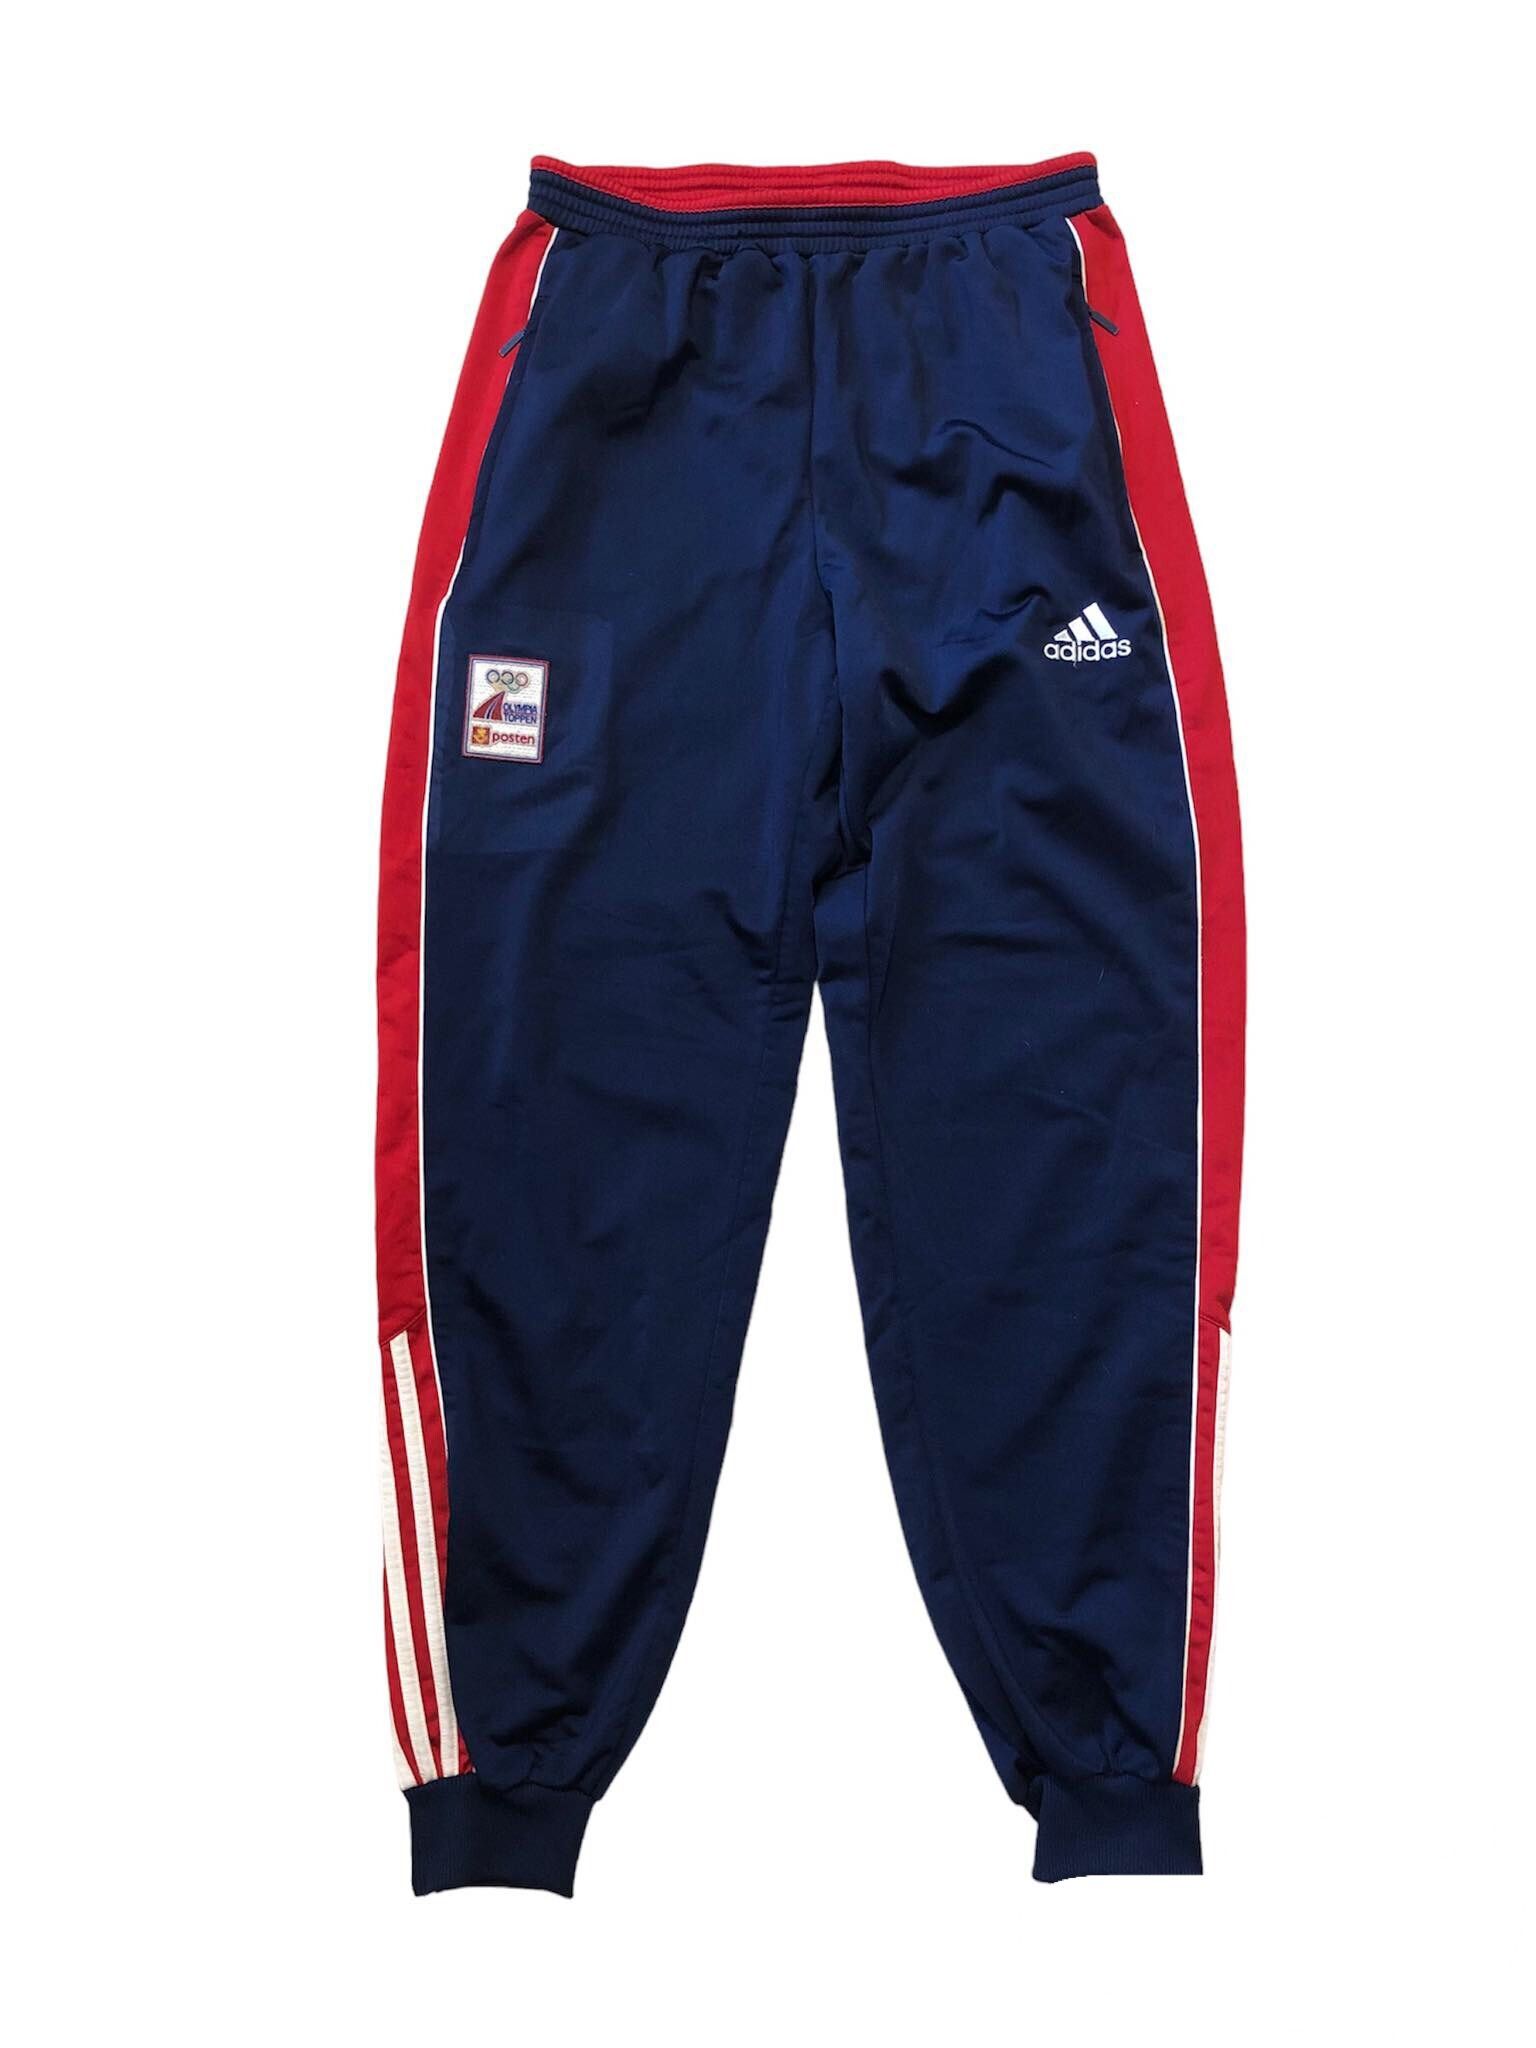 Adidas Adidas Olympia Toppen sweatpants vintage size M? 70s 80s Size US 32 / EU 48 - 1 Preview